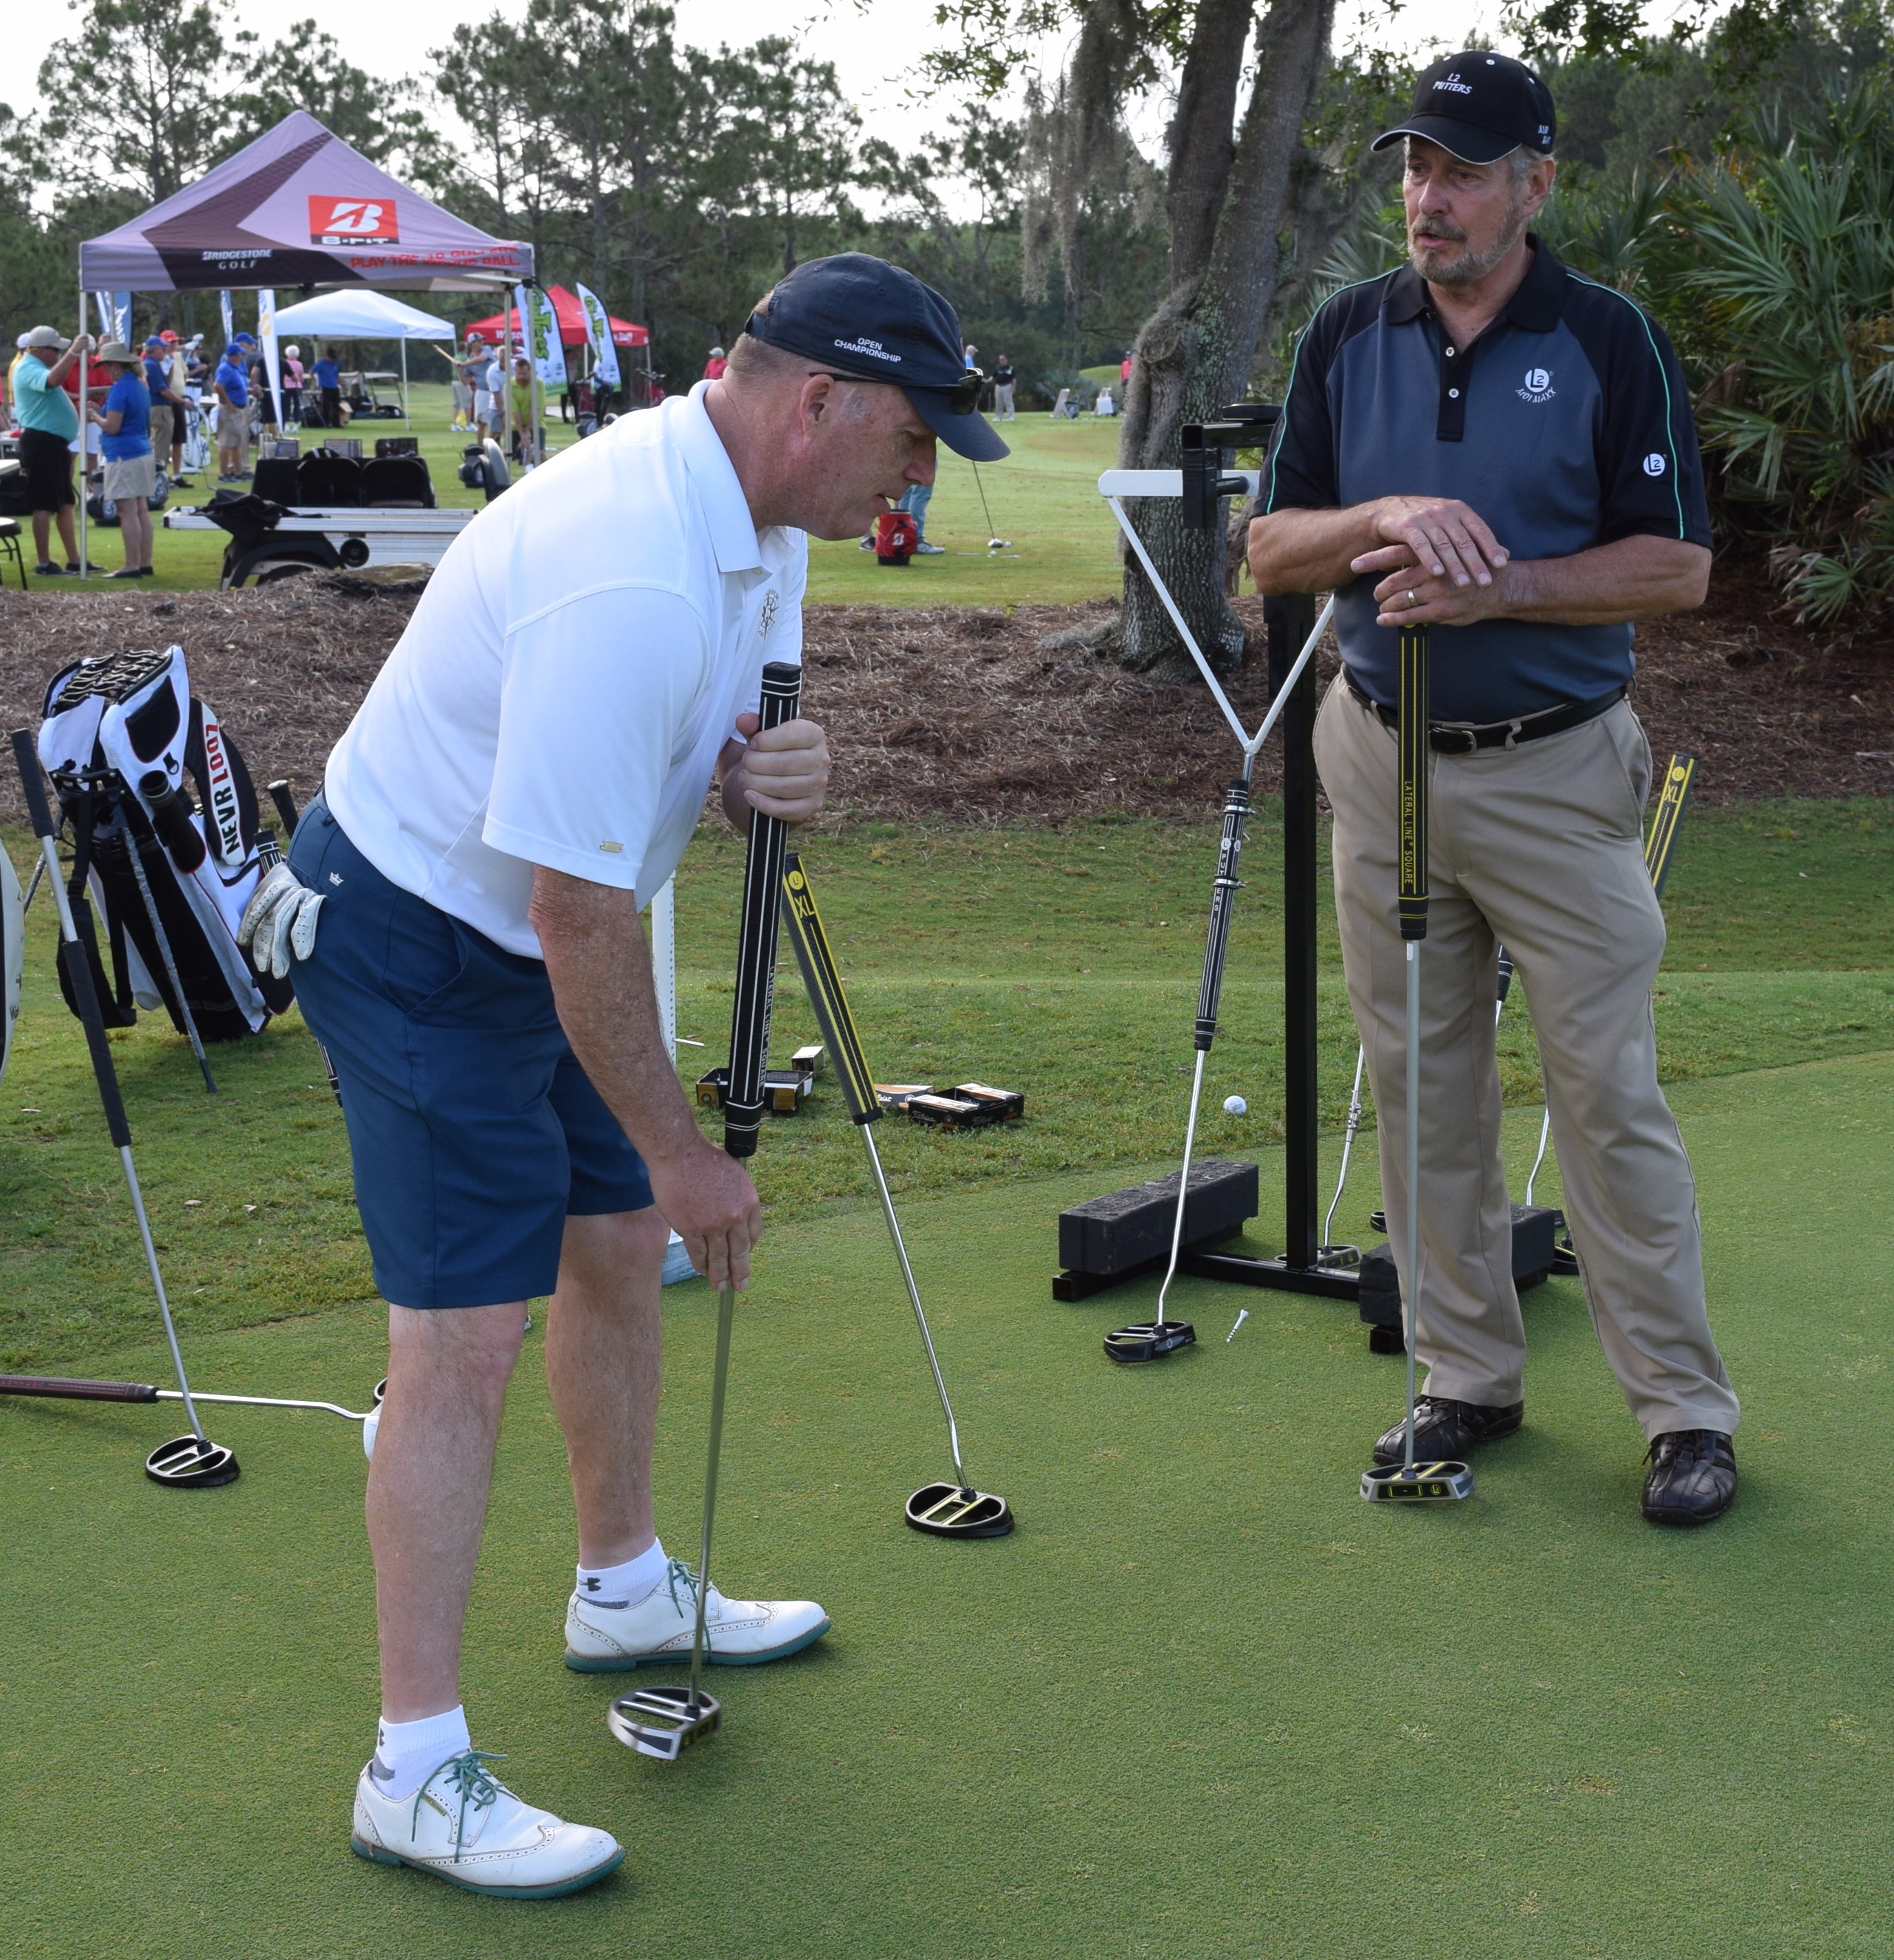 ING Spring Conference’s Demo Lab Gives Media A Chance To Test New Golf Products First-Hand